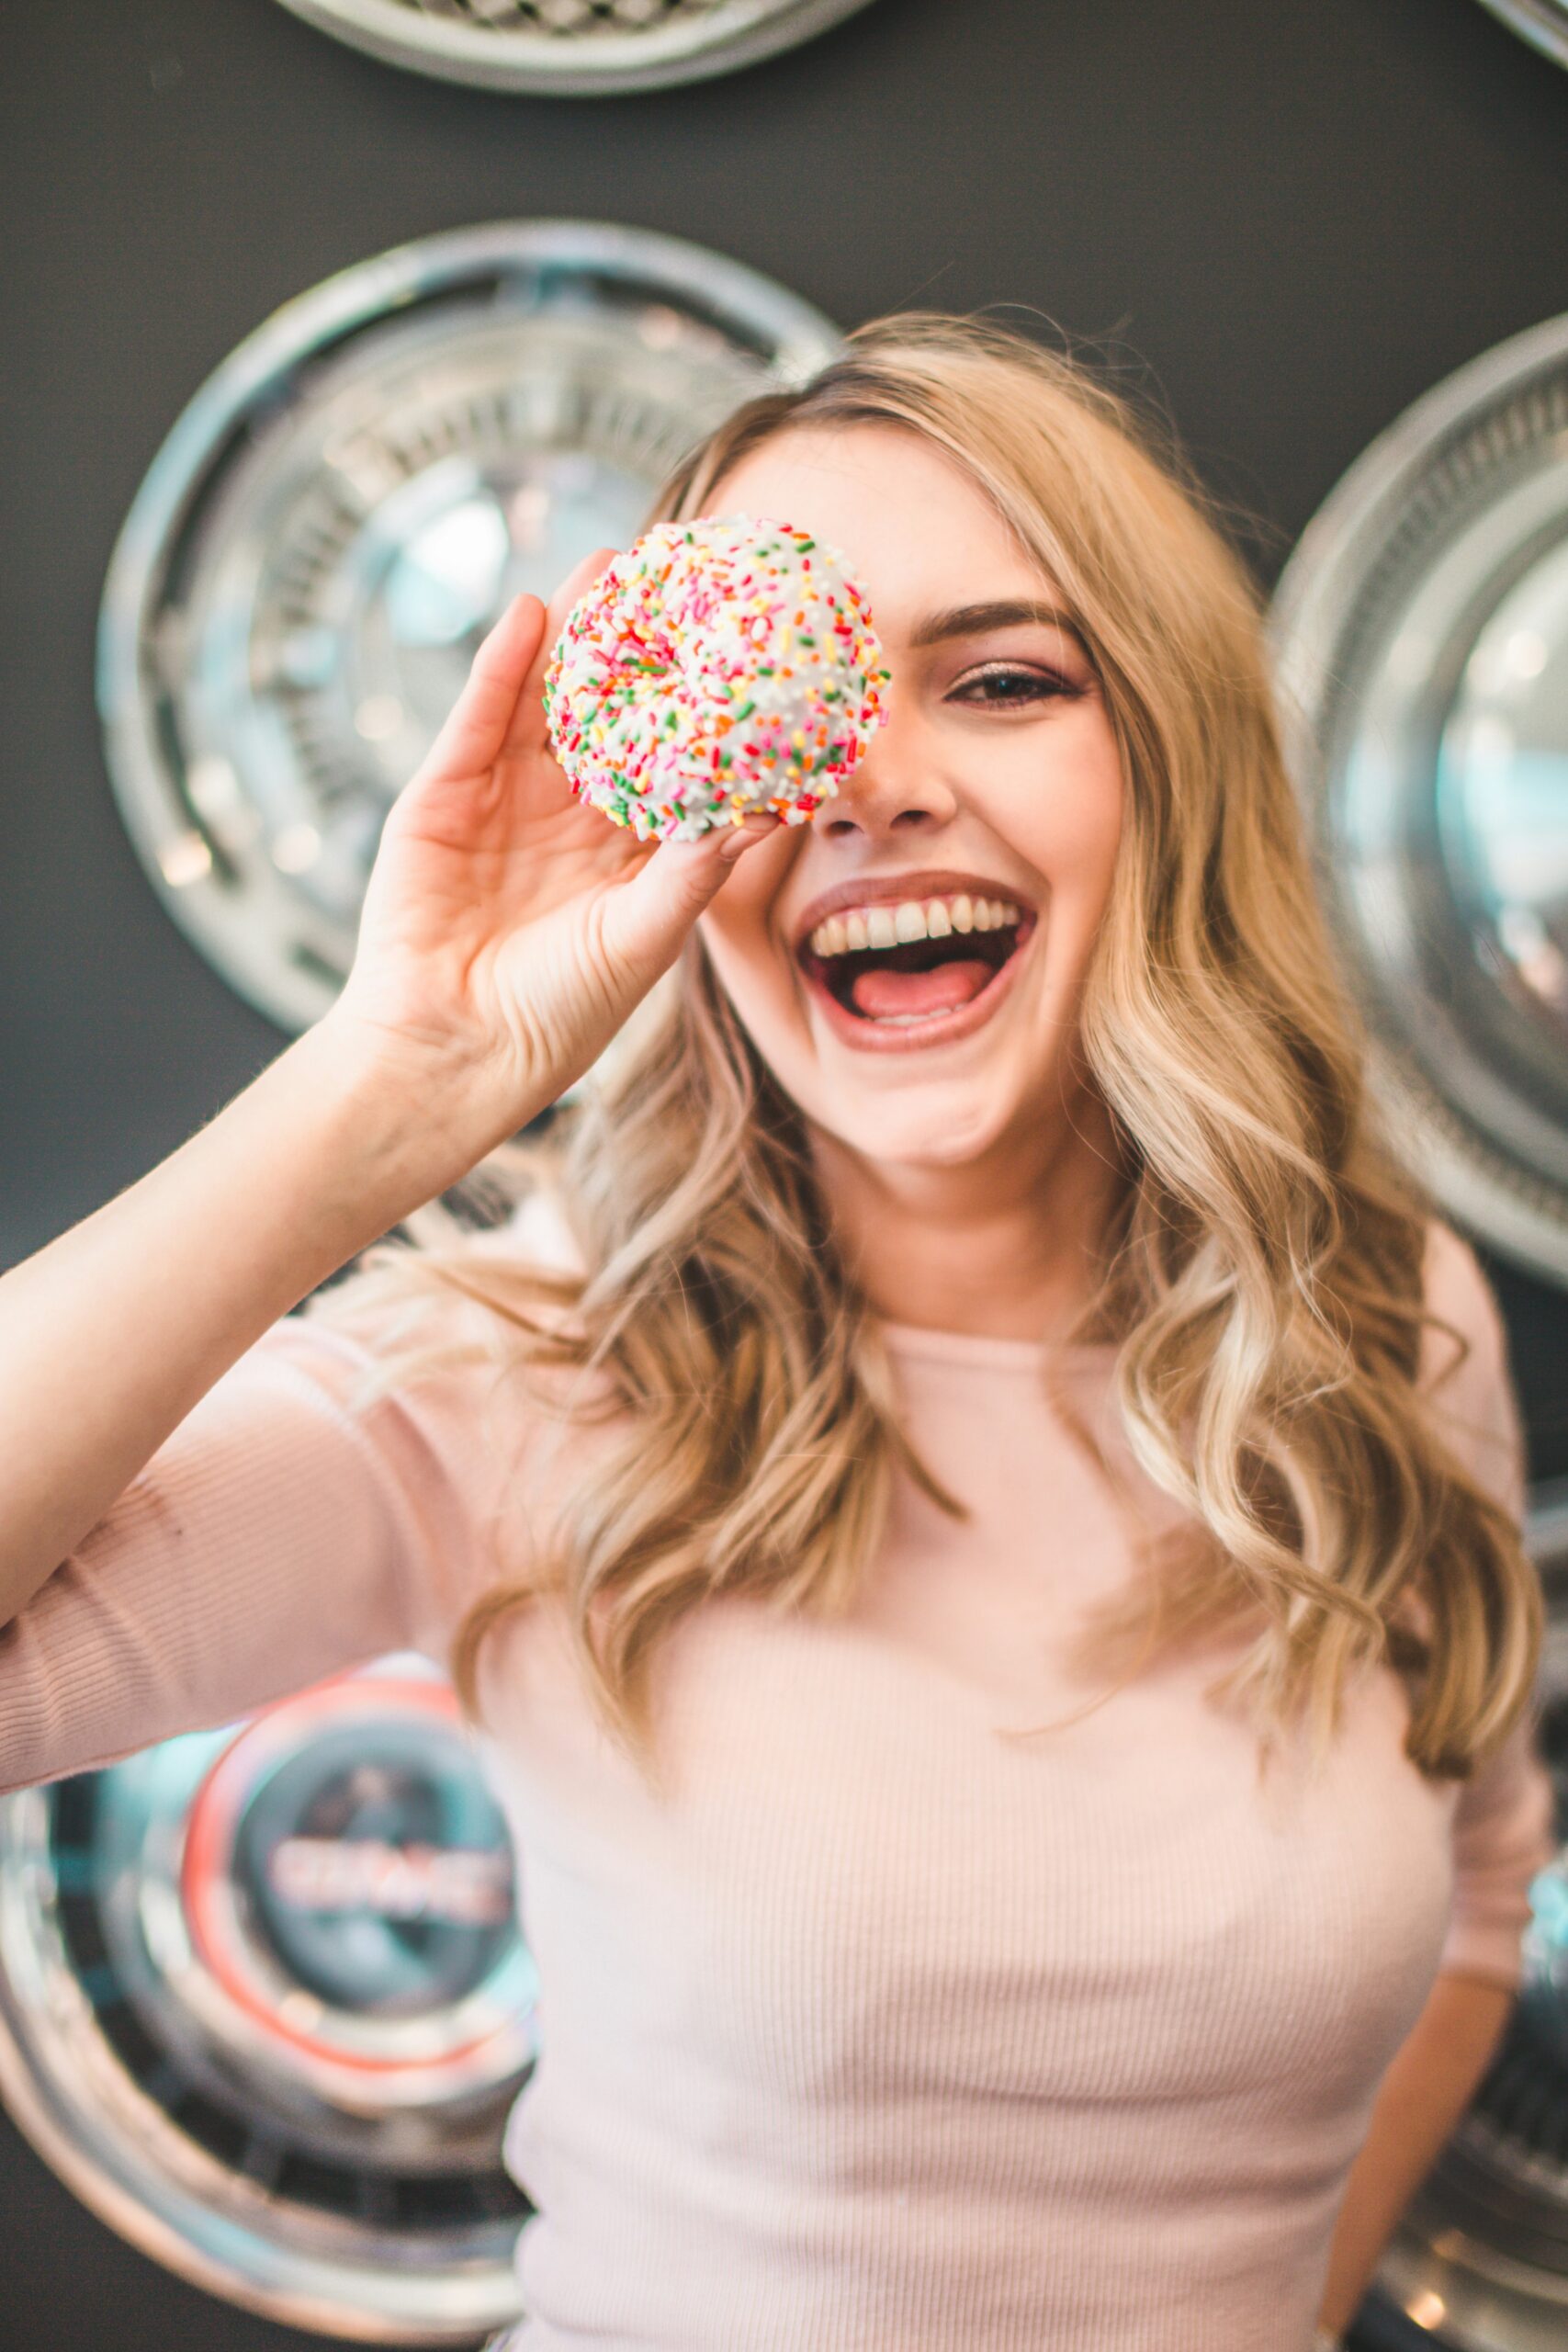 Manhattan woman smiling in a bakery holding a donut. She has overcome her black and white thinking.